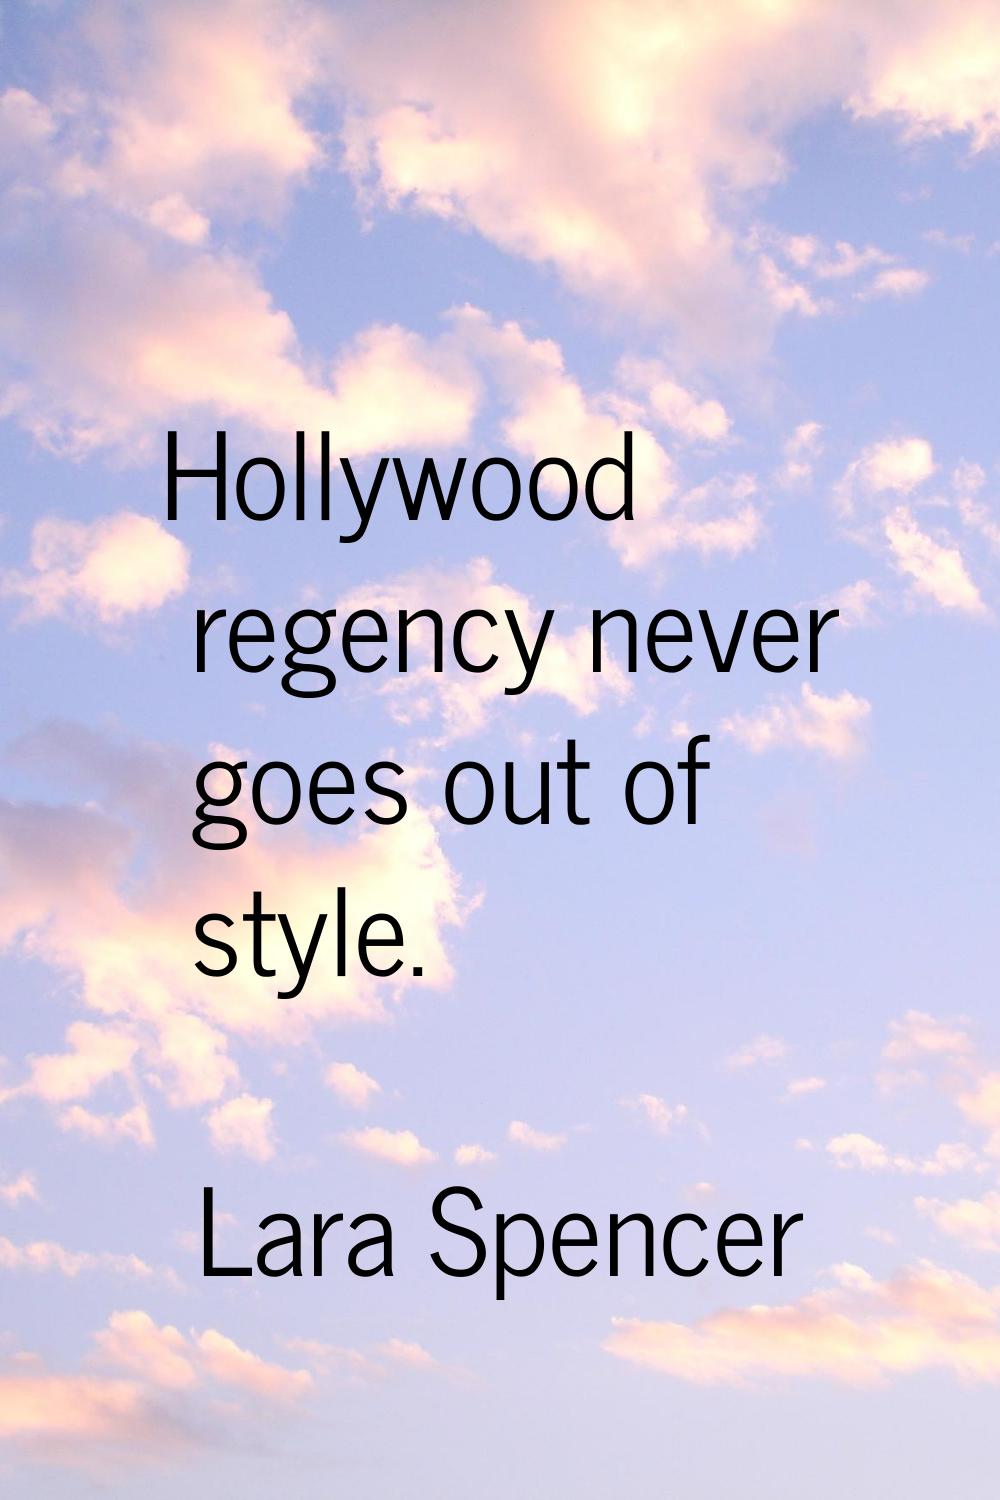 Hollywood regency never goes out of style.